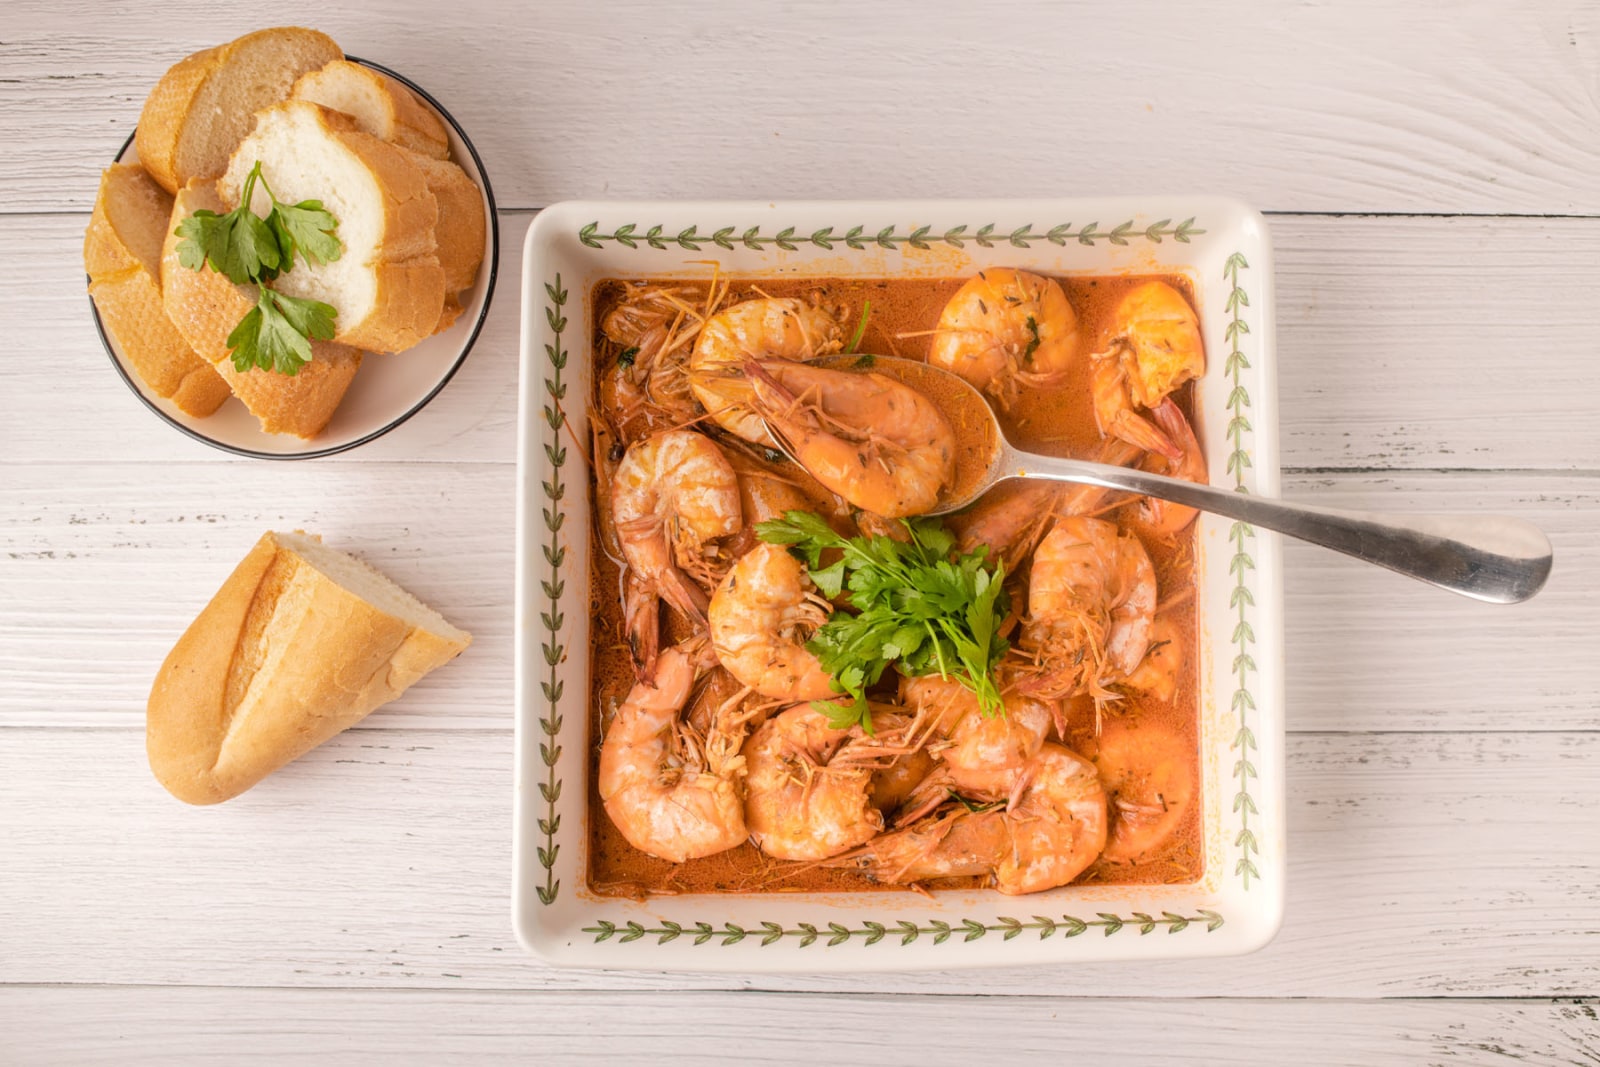 New Orleans-style BBQ Shrimp by Bolle Apps